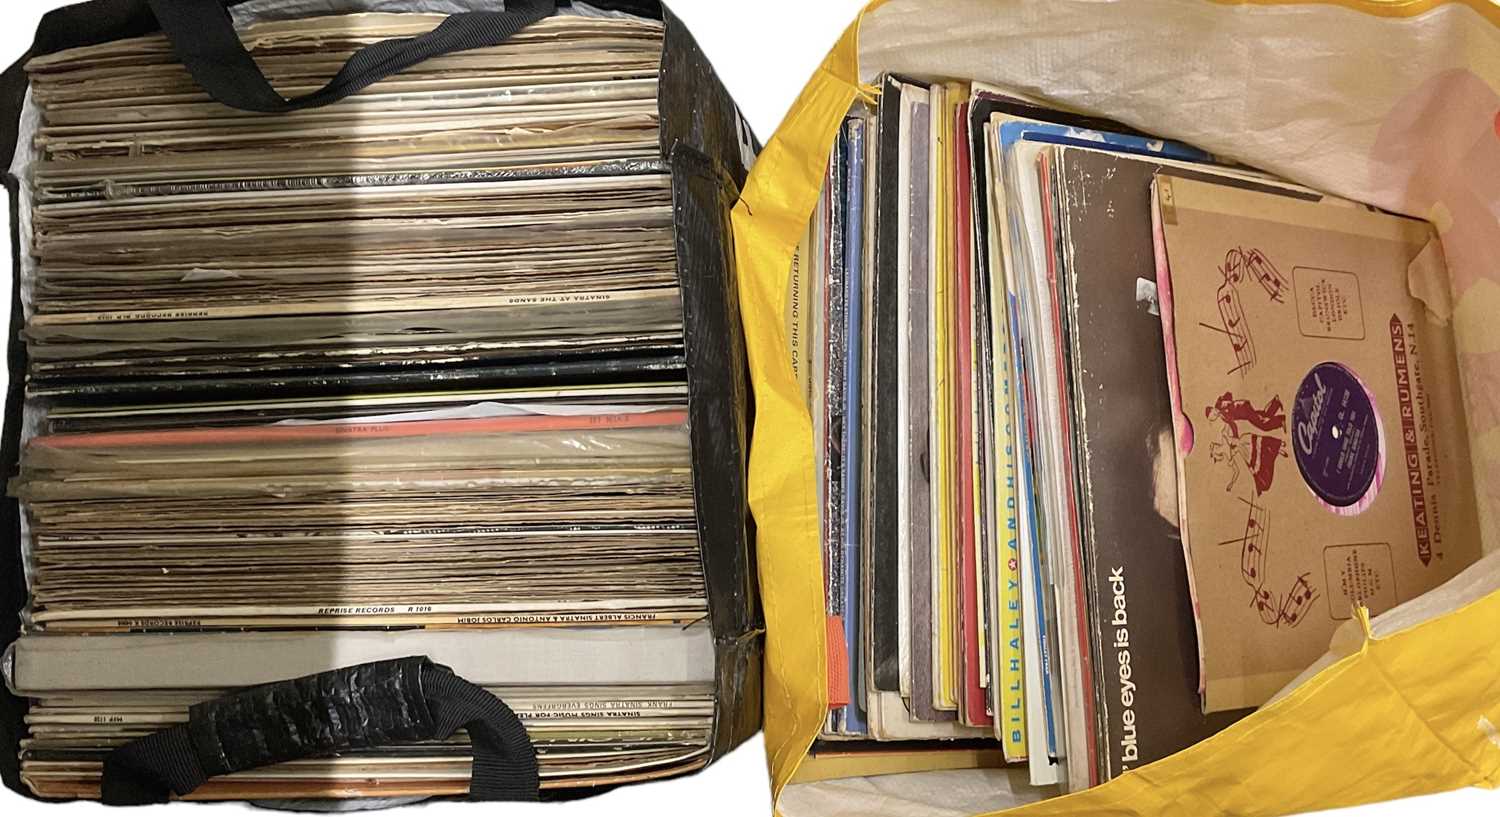 A large quantity of records including Frank Sinatra, Queen, etc.